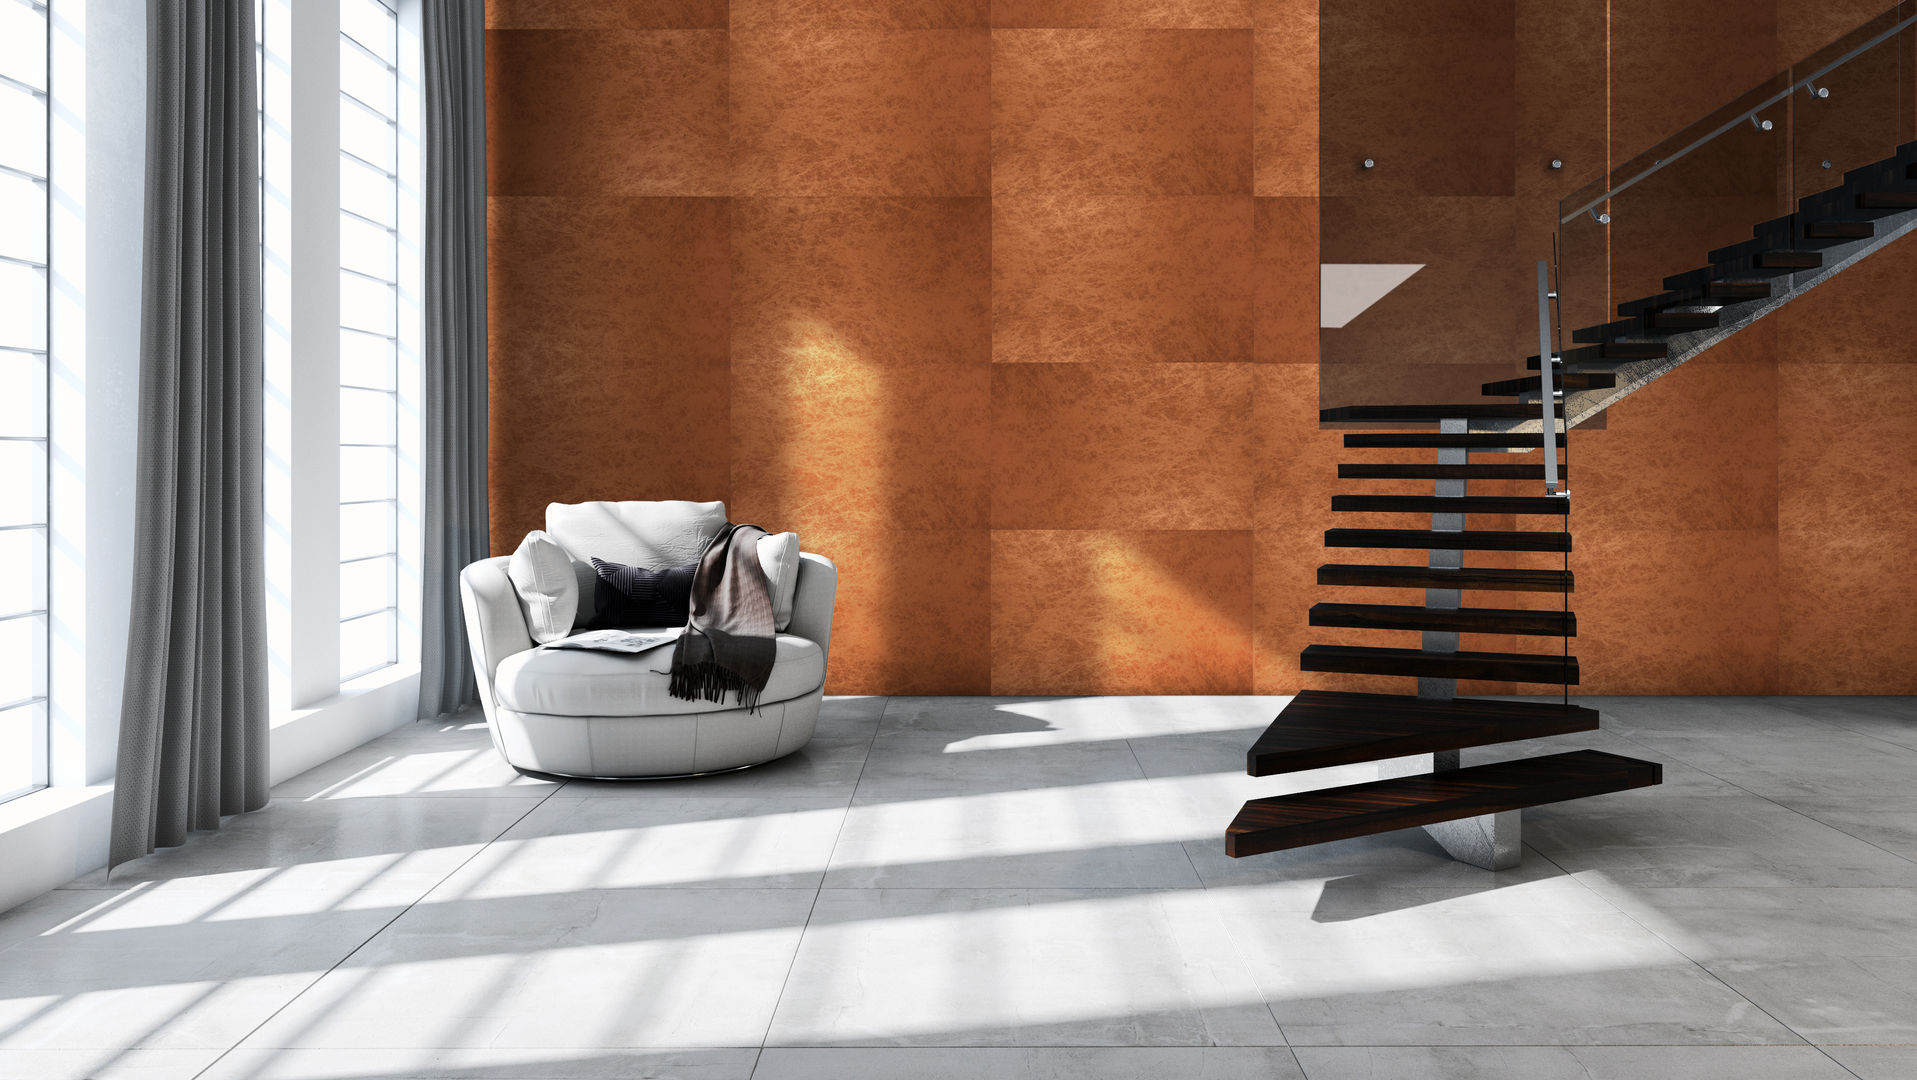 Metalegance Collection, Muratto | Cork Wall Design Muratto | Cork Wall Design Modern living room